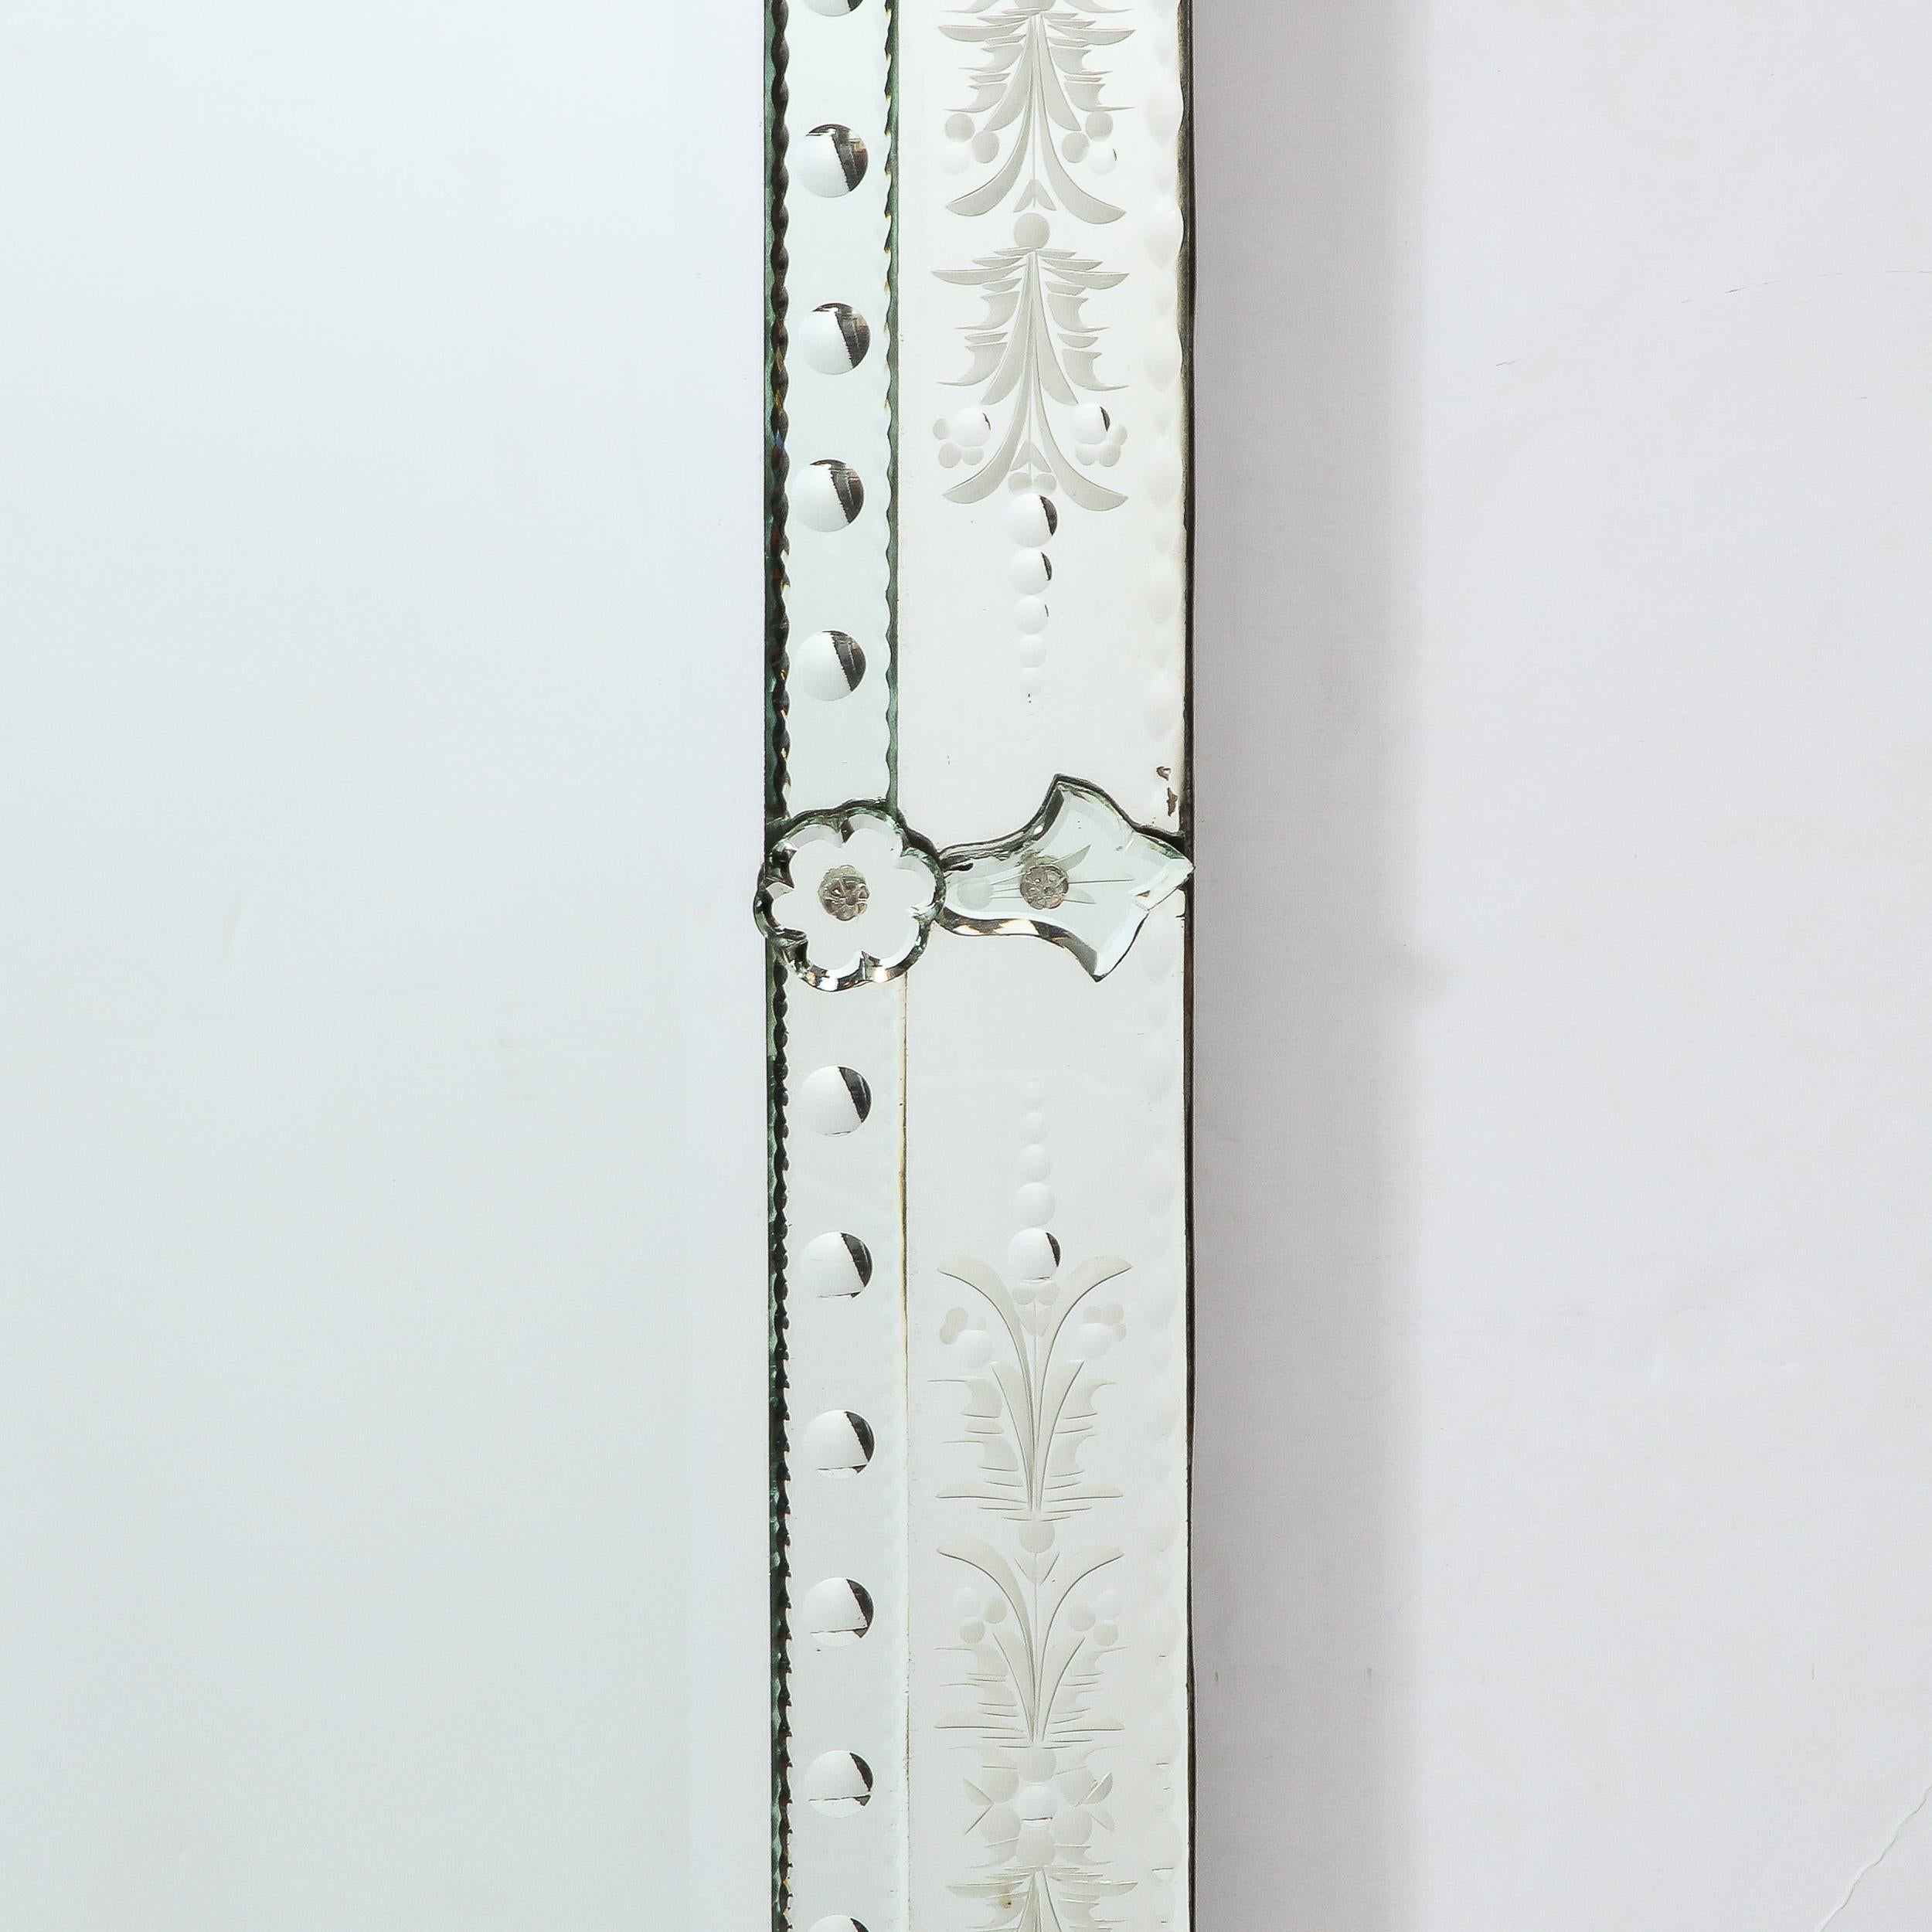 Mid-20th Century Mid-Century Modern Venetian Glass Mirror W/ Chain Beveling and Reverse Etched